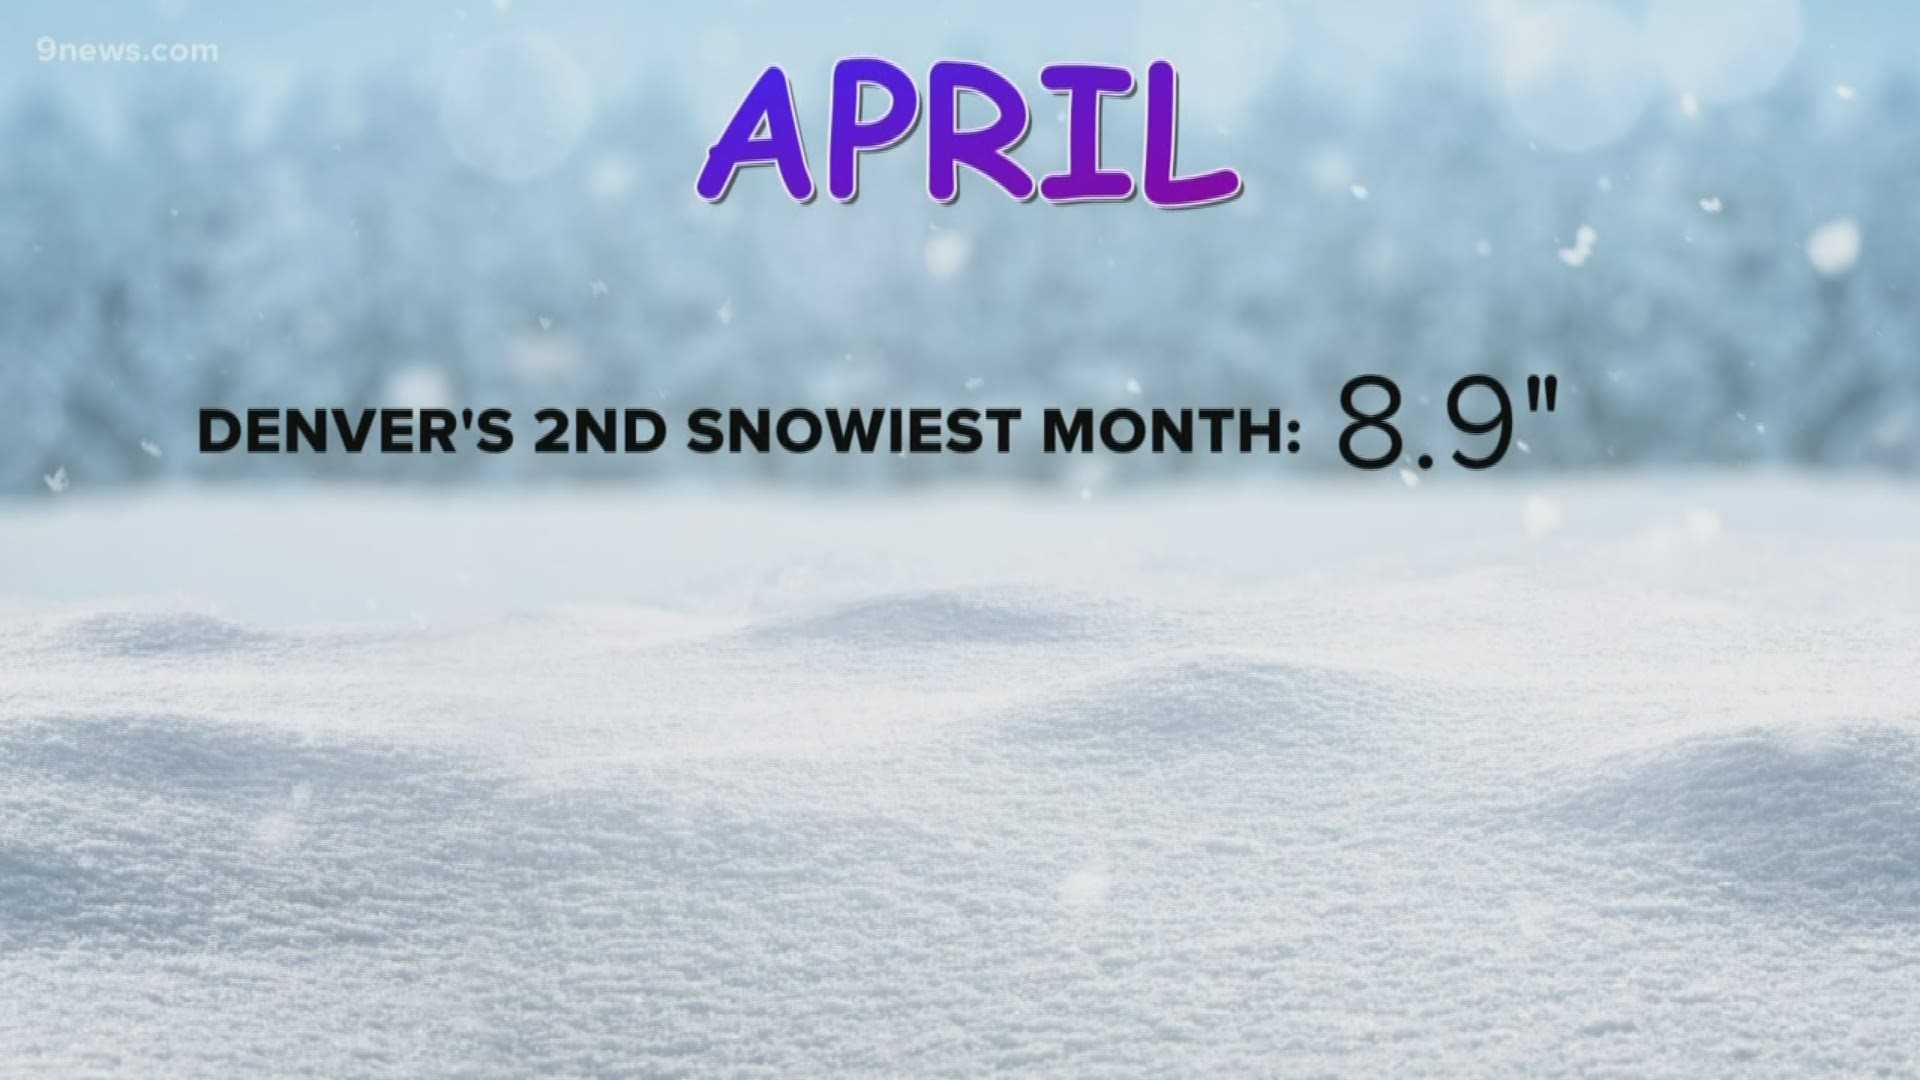 Meteorologist Cory Reppenhagen tells us what Mother Nature likes to serve up in April.